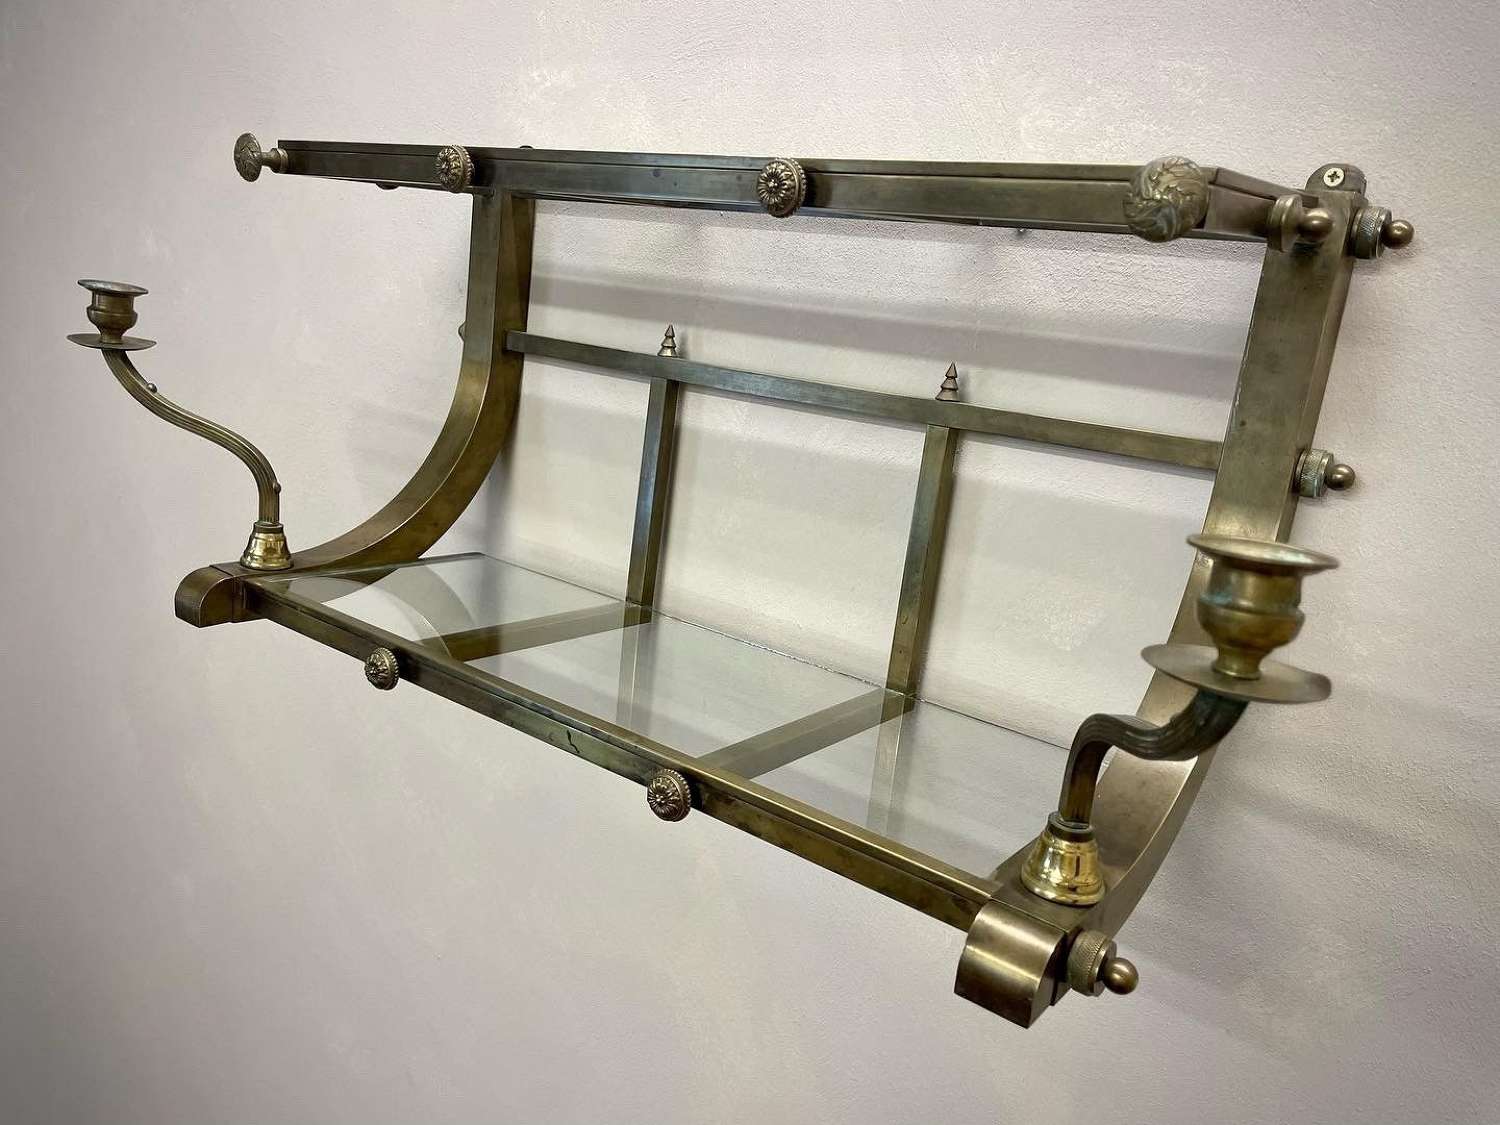 Early 20c Brass railway luggage rack and sconces.